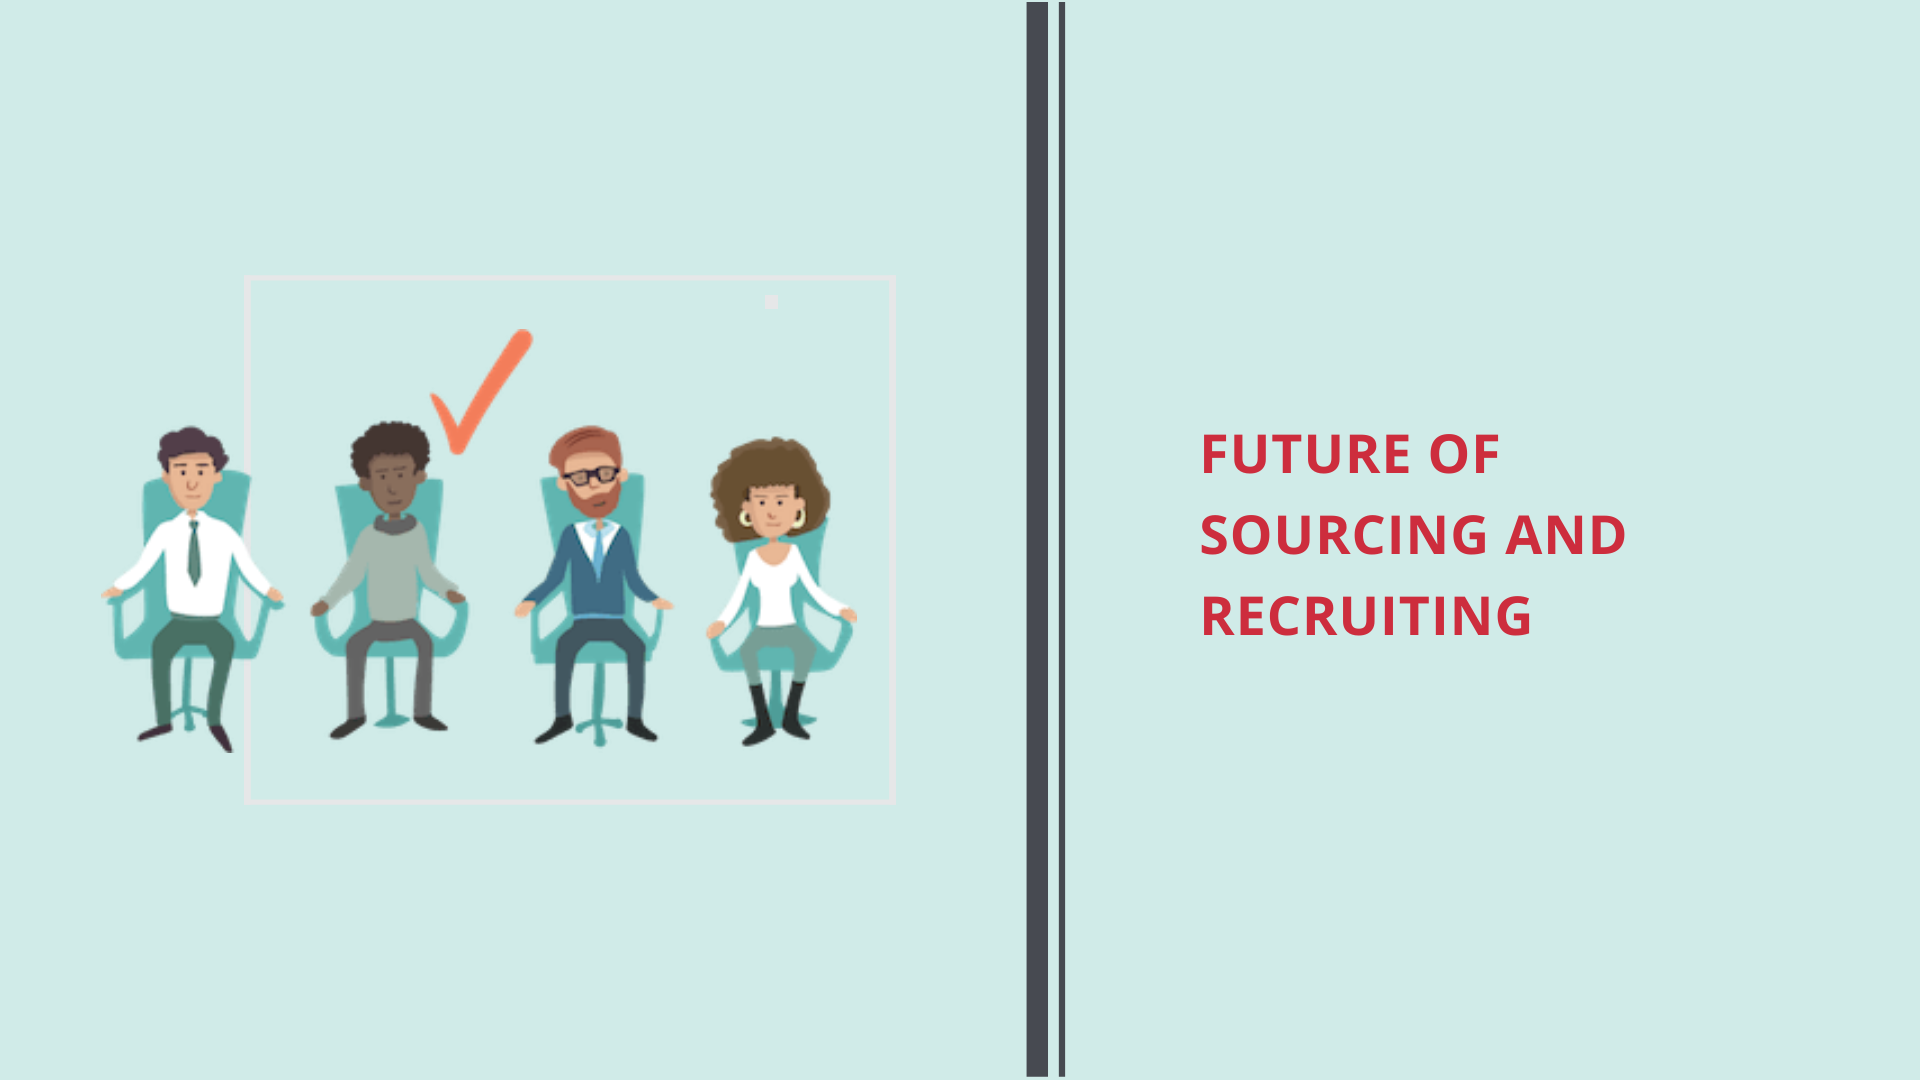 FUTURE OF SOURCING AND RECRUITING